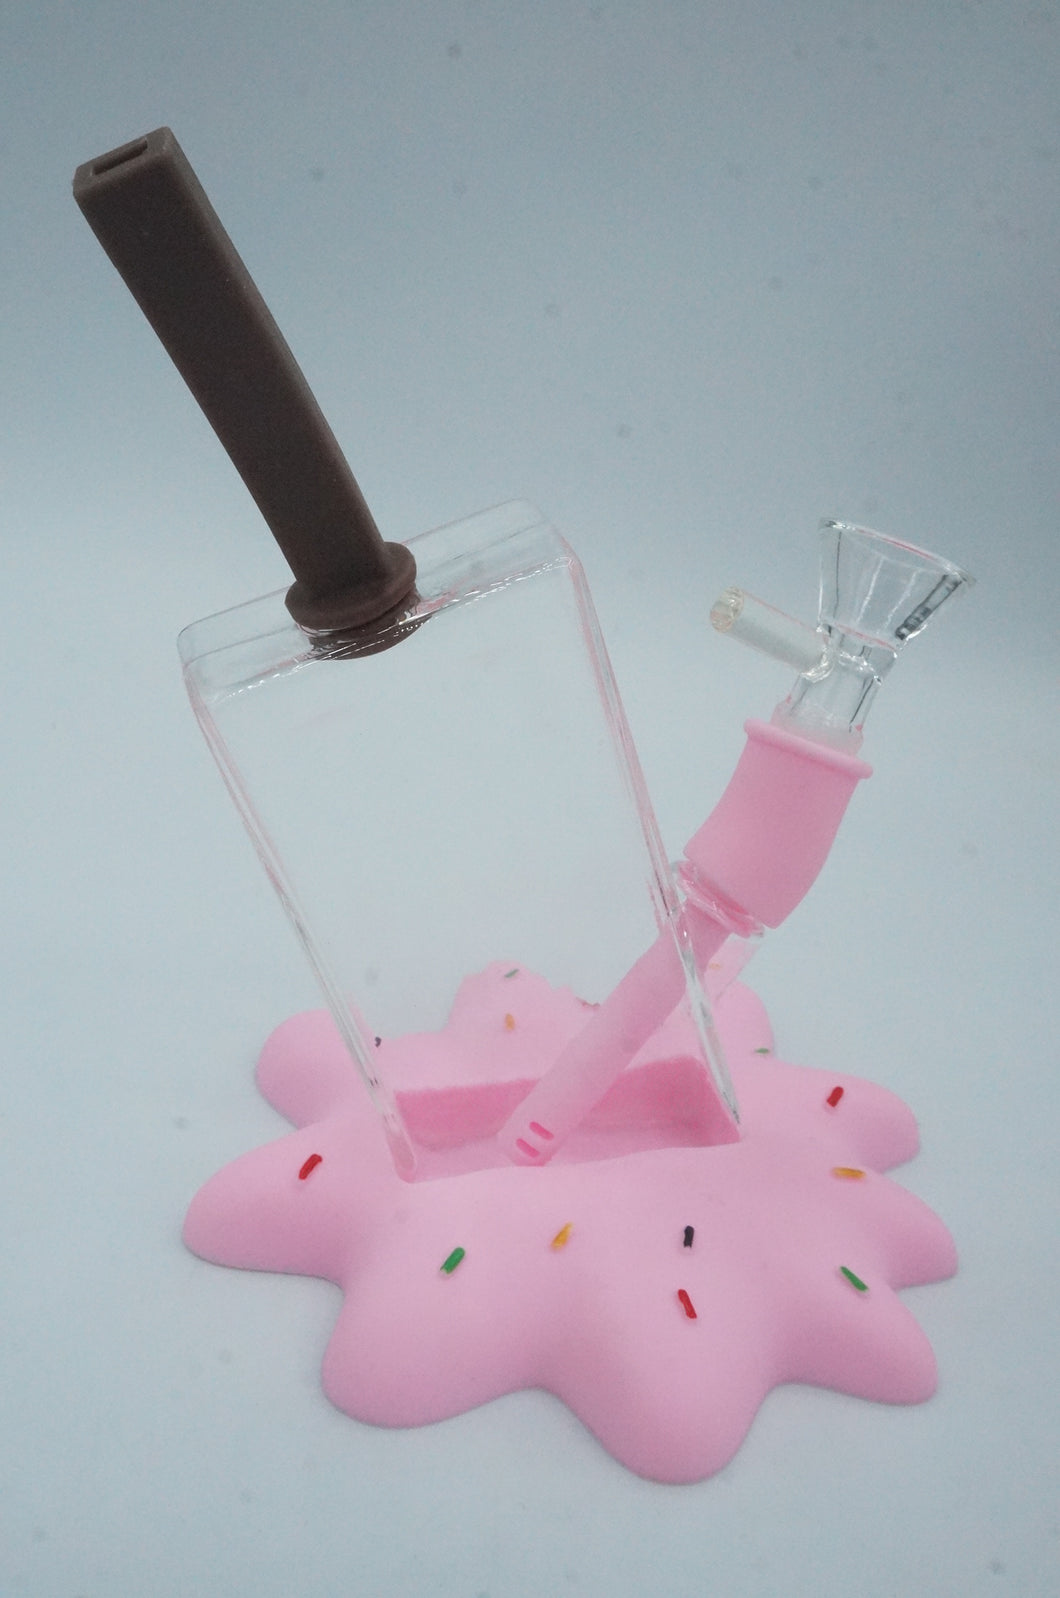 Large Glass Silicone Water Pipes - ohiohippiessmokeshop.com